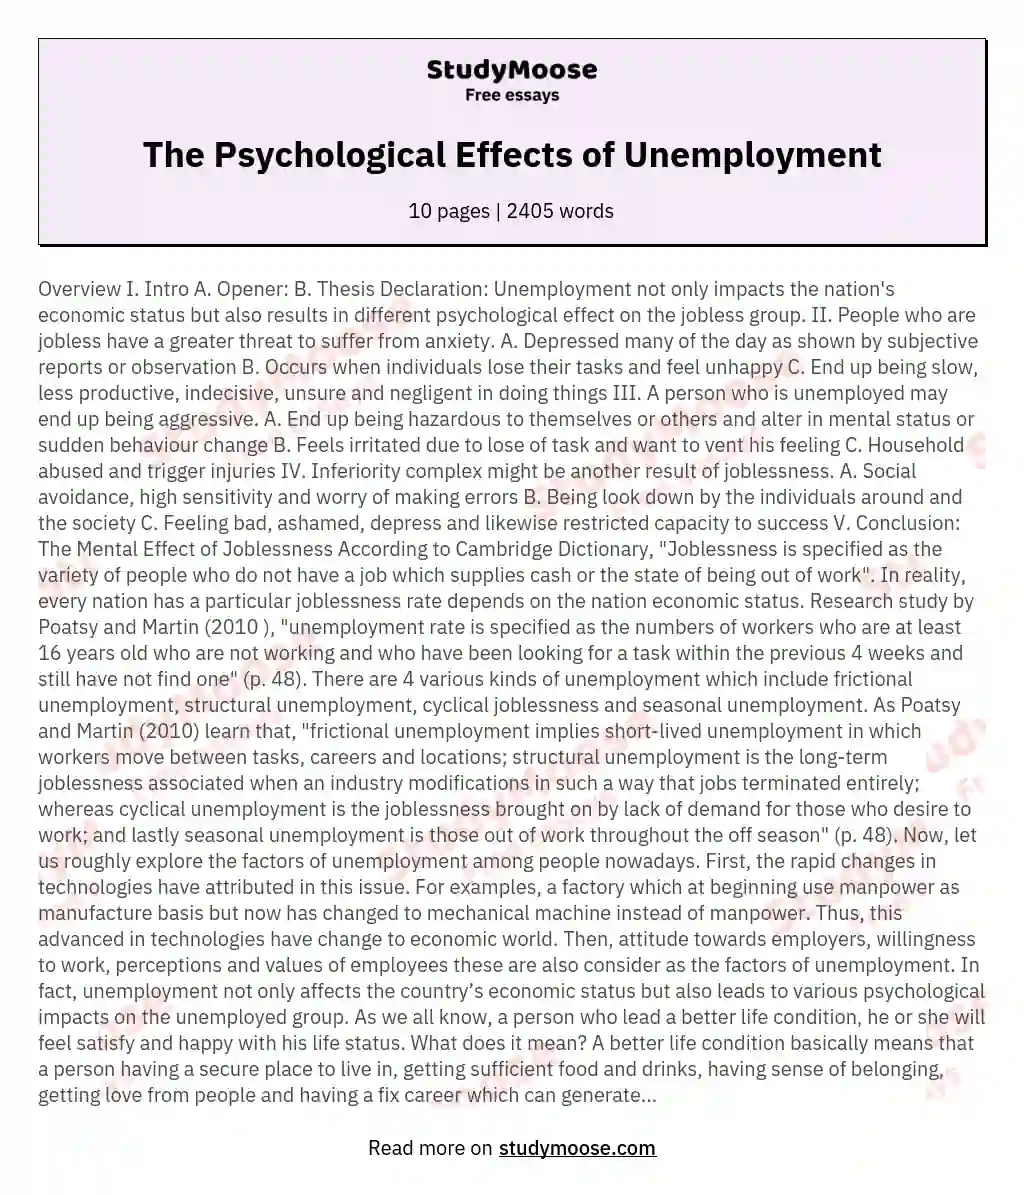 The Psychological Effects of Unemployment essay